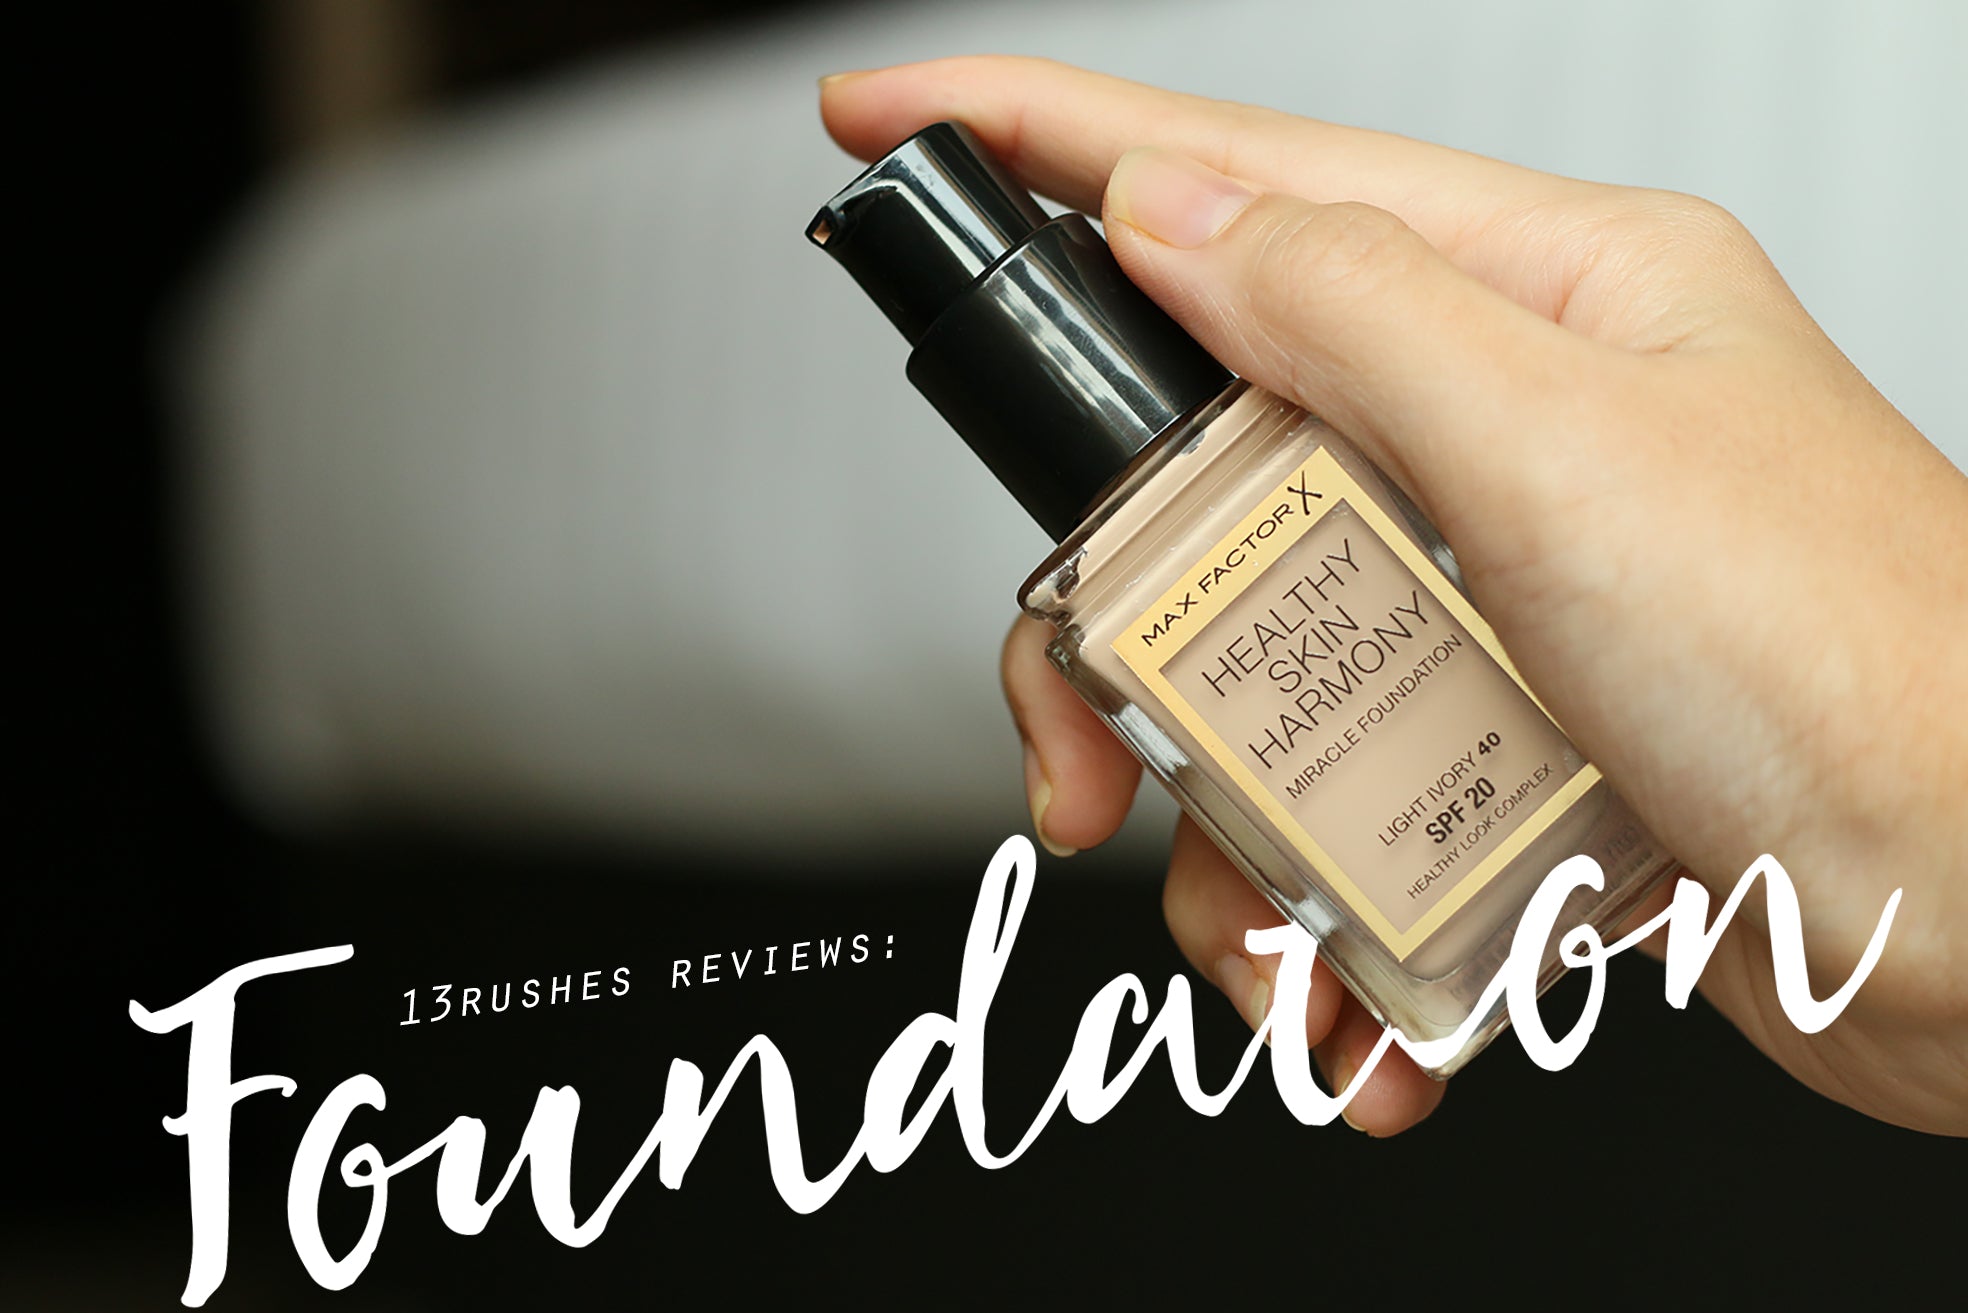 13rushes reviews: Max Factor’s Healthy Skin Harmony Foundation